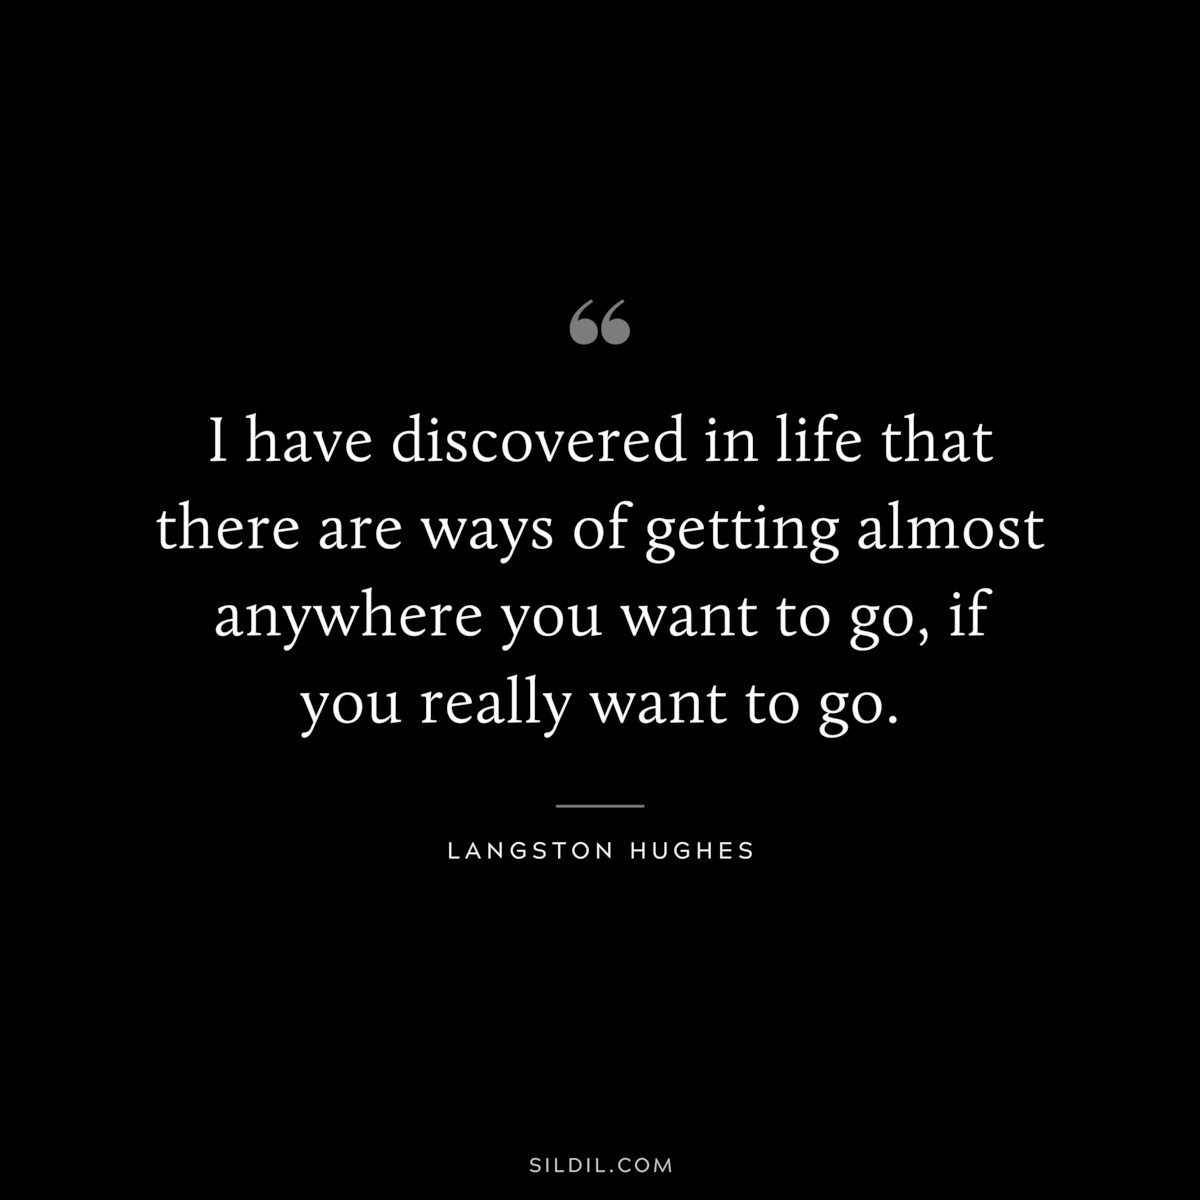 I have discovered in life that there are ways of getting almost anywhere you want to go, if you really want to go. ― Langston Hughes